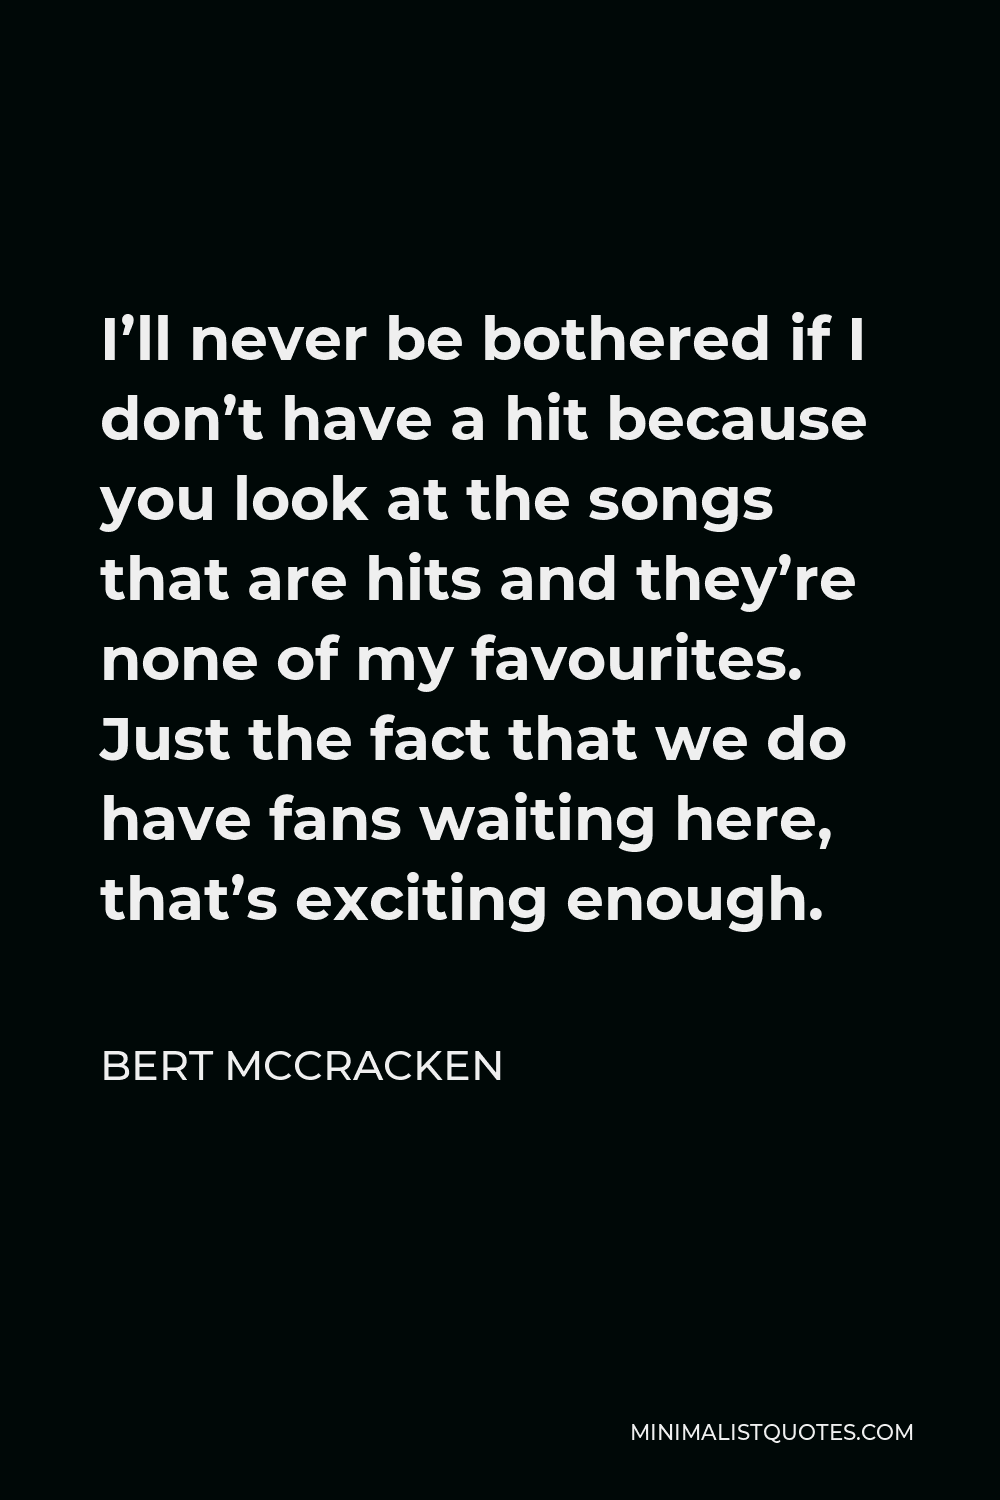 Bert McCracken Quote - I’ll never be bothered if I don’t have a hit because you look at the songs that are hits and they’re none of my favourites. Just the fact that we do have fans waiting here, that’s exciting enough.